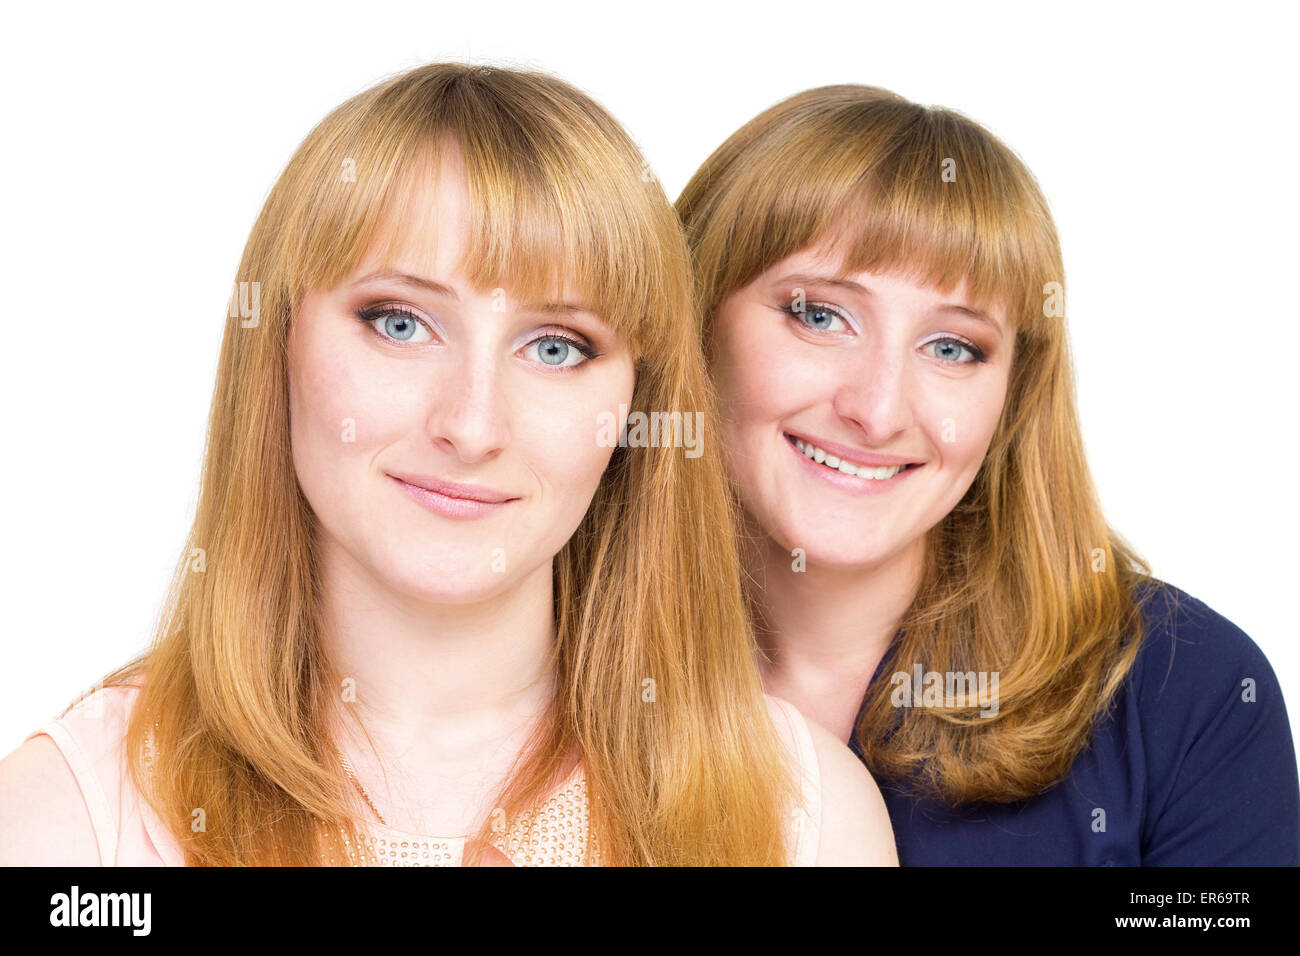 Young twins girls isolated on white background. Cheerful smiling sisters looking straight into camera Stock Photo